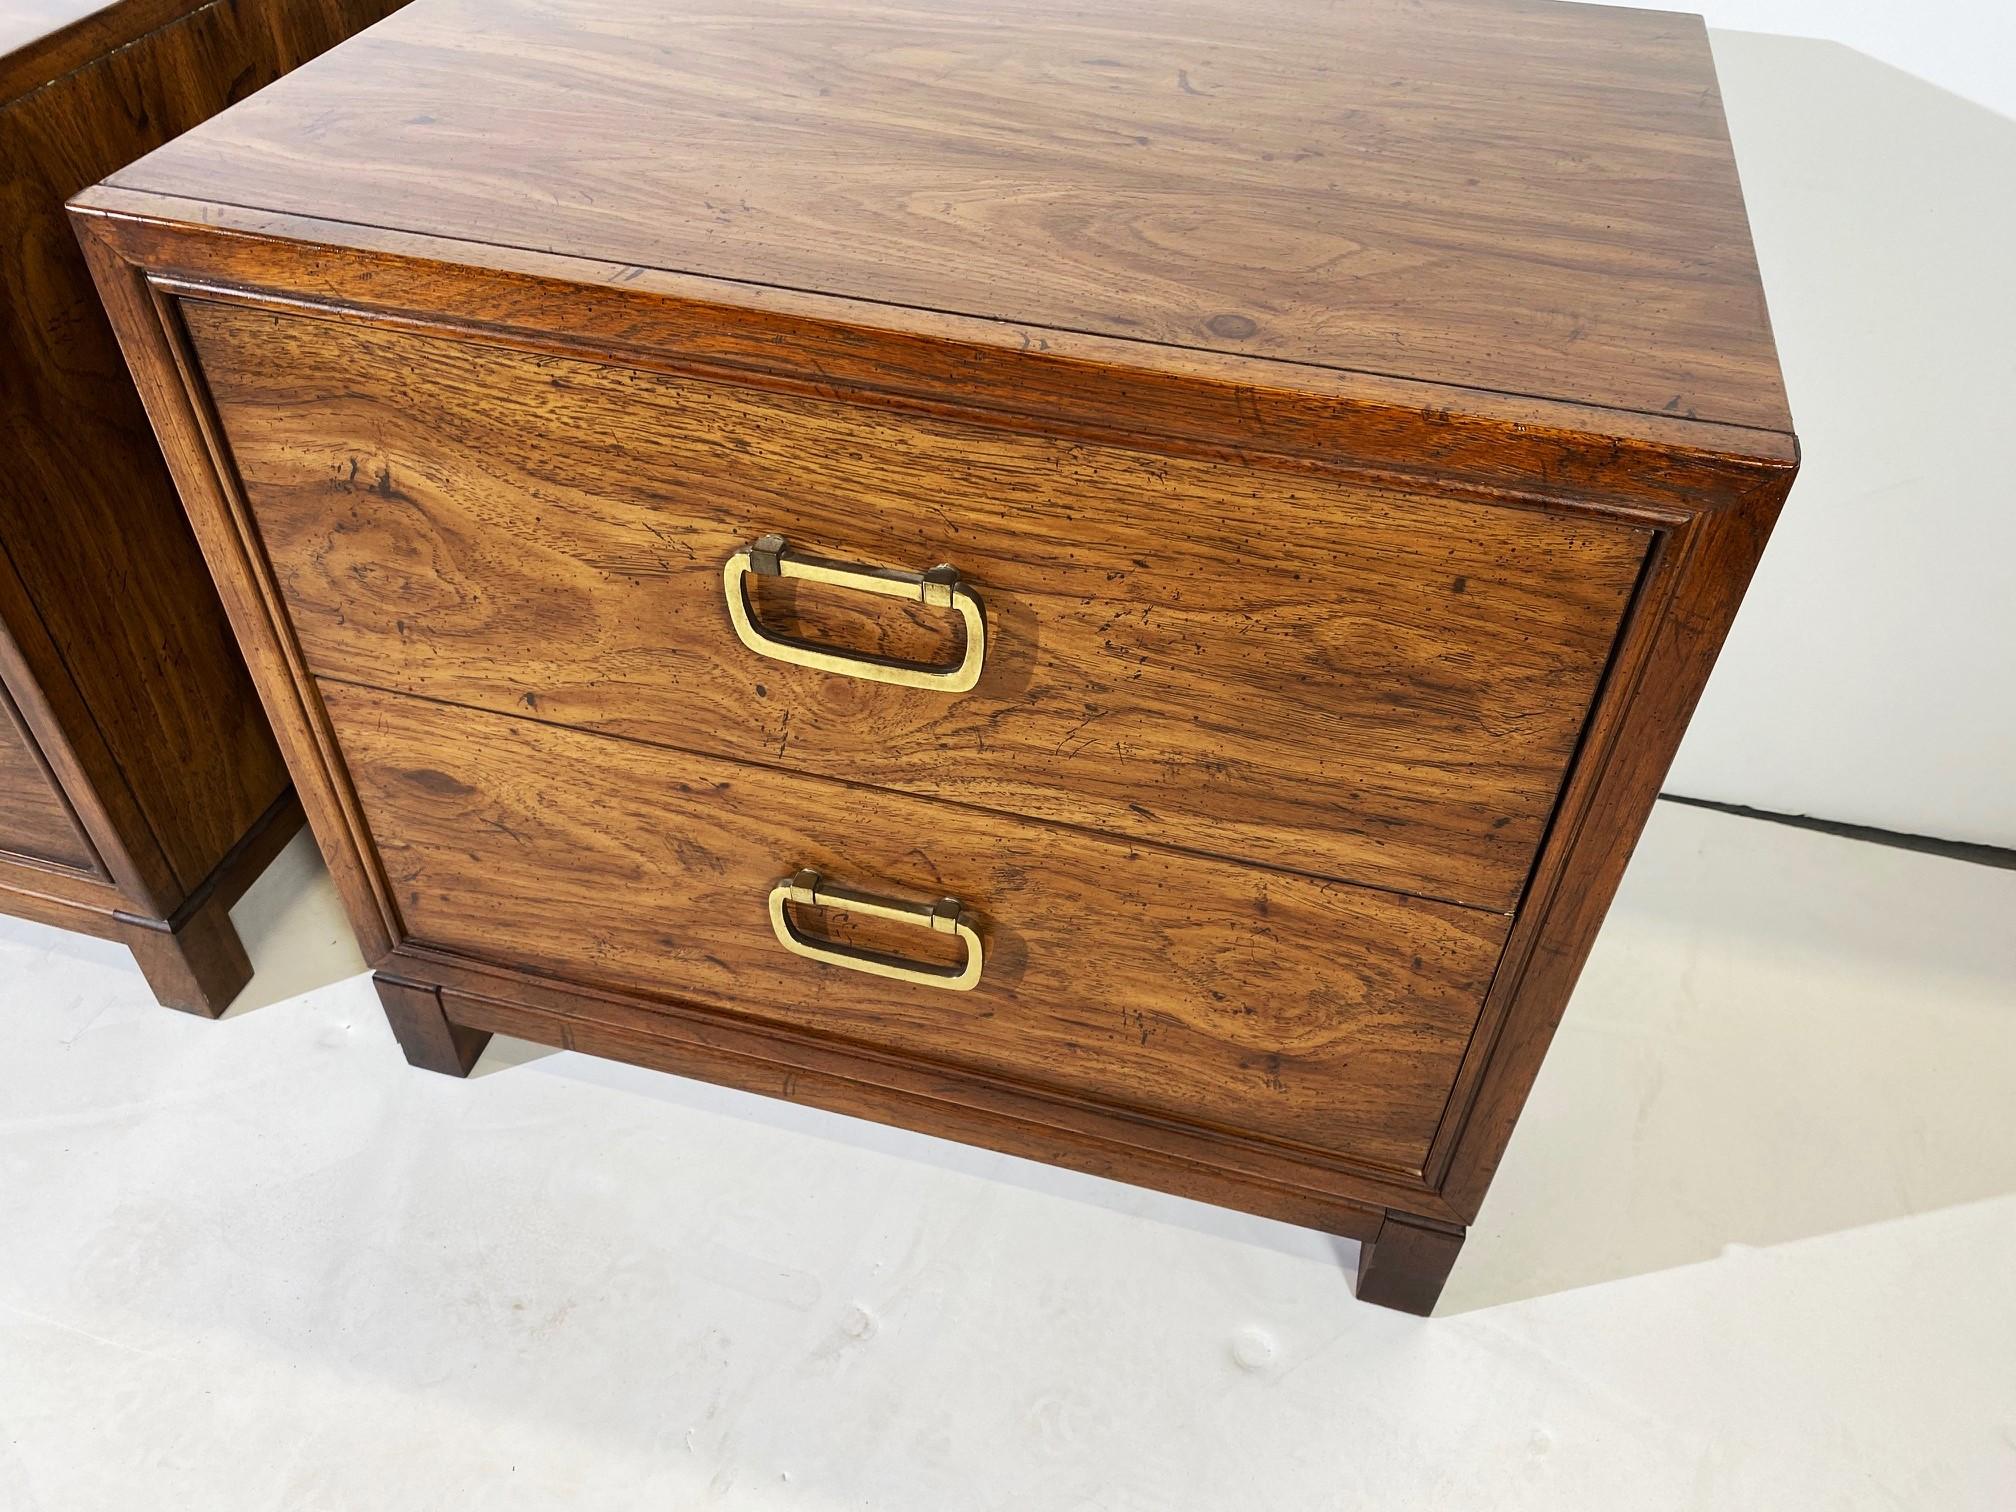 Pair of nightstands by Drexel. Two drawers with brass pulls.